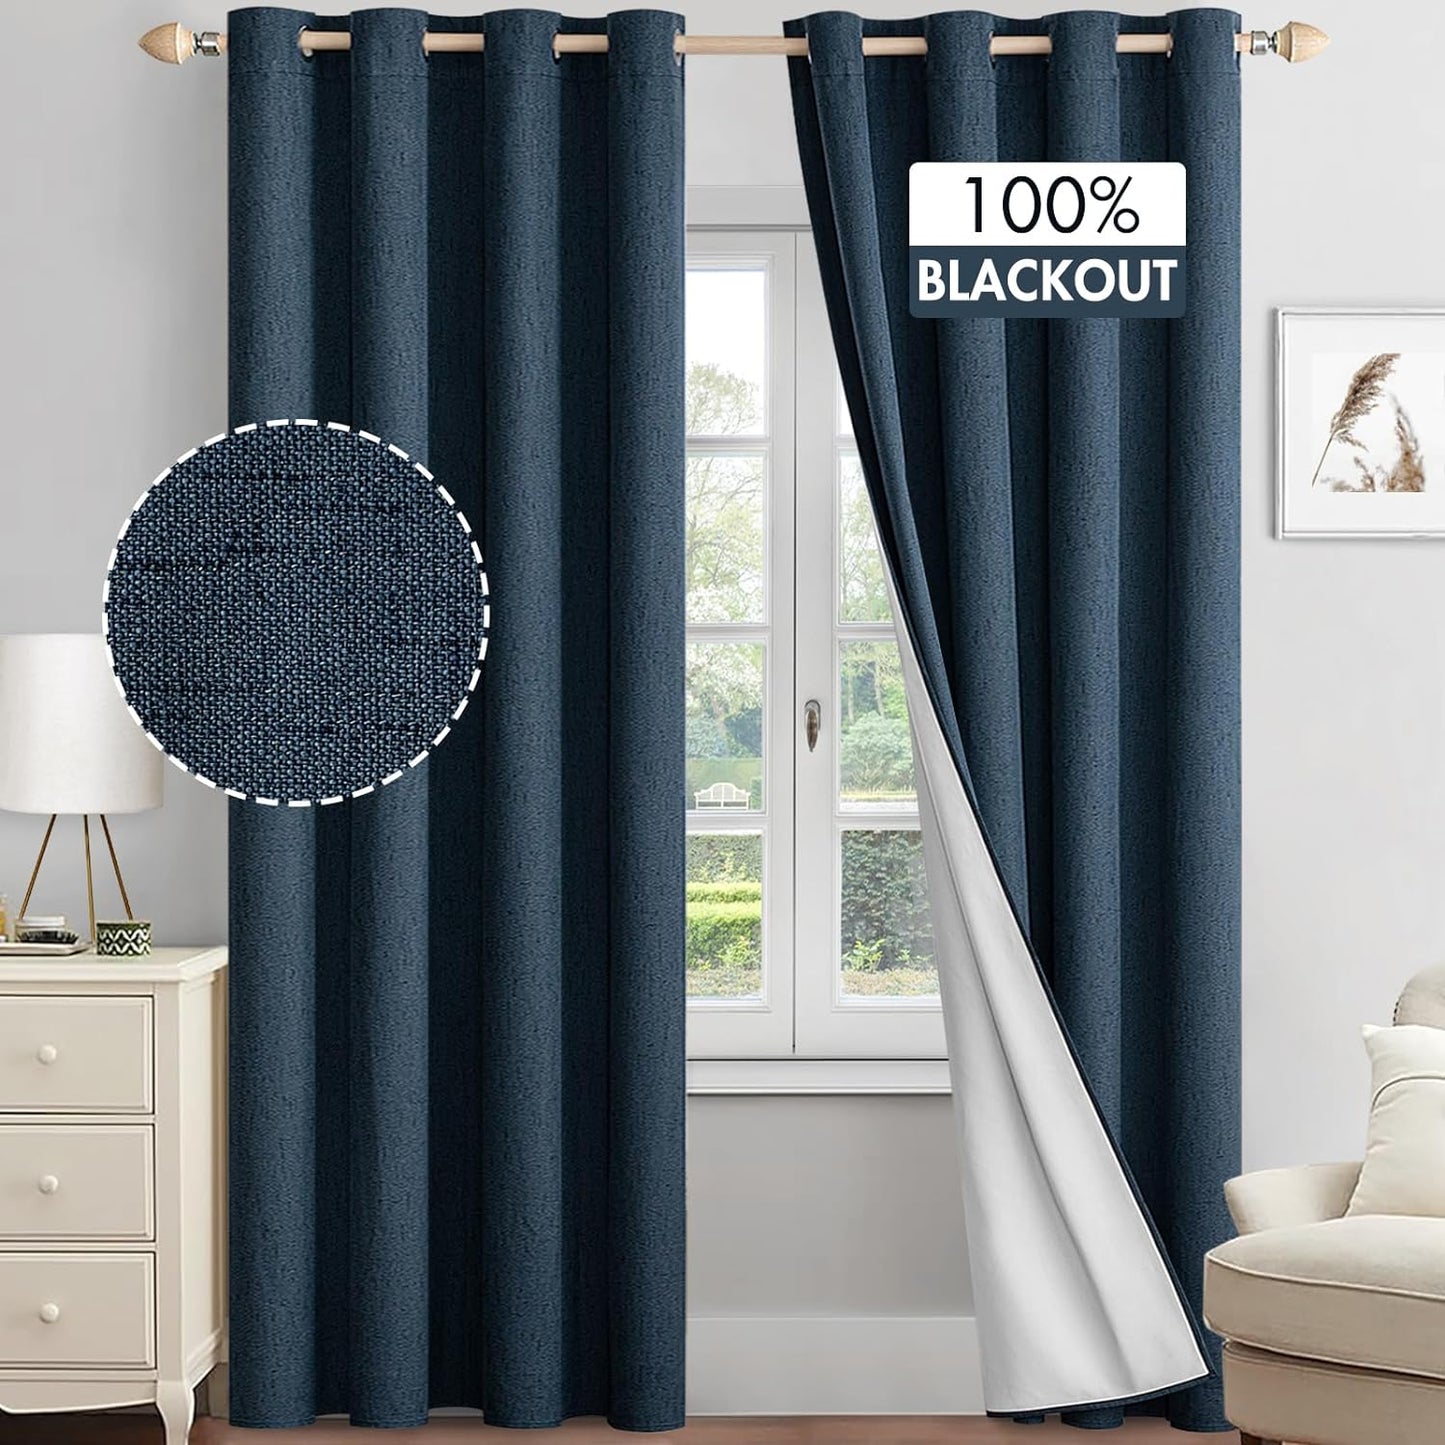 MIULEE Linen Textured 100% Blackout Curtains for Bedroom 84 Inches Long Natural Beige Thermal Insulated Black Out Curtains/Draperies with White Liner for Living Room/Nursery, Grommet Top, 2 Panels  MIULEE Navy W52Xl90 